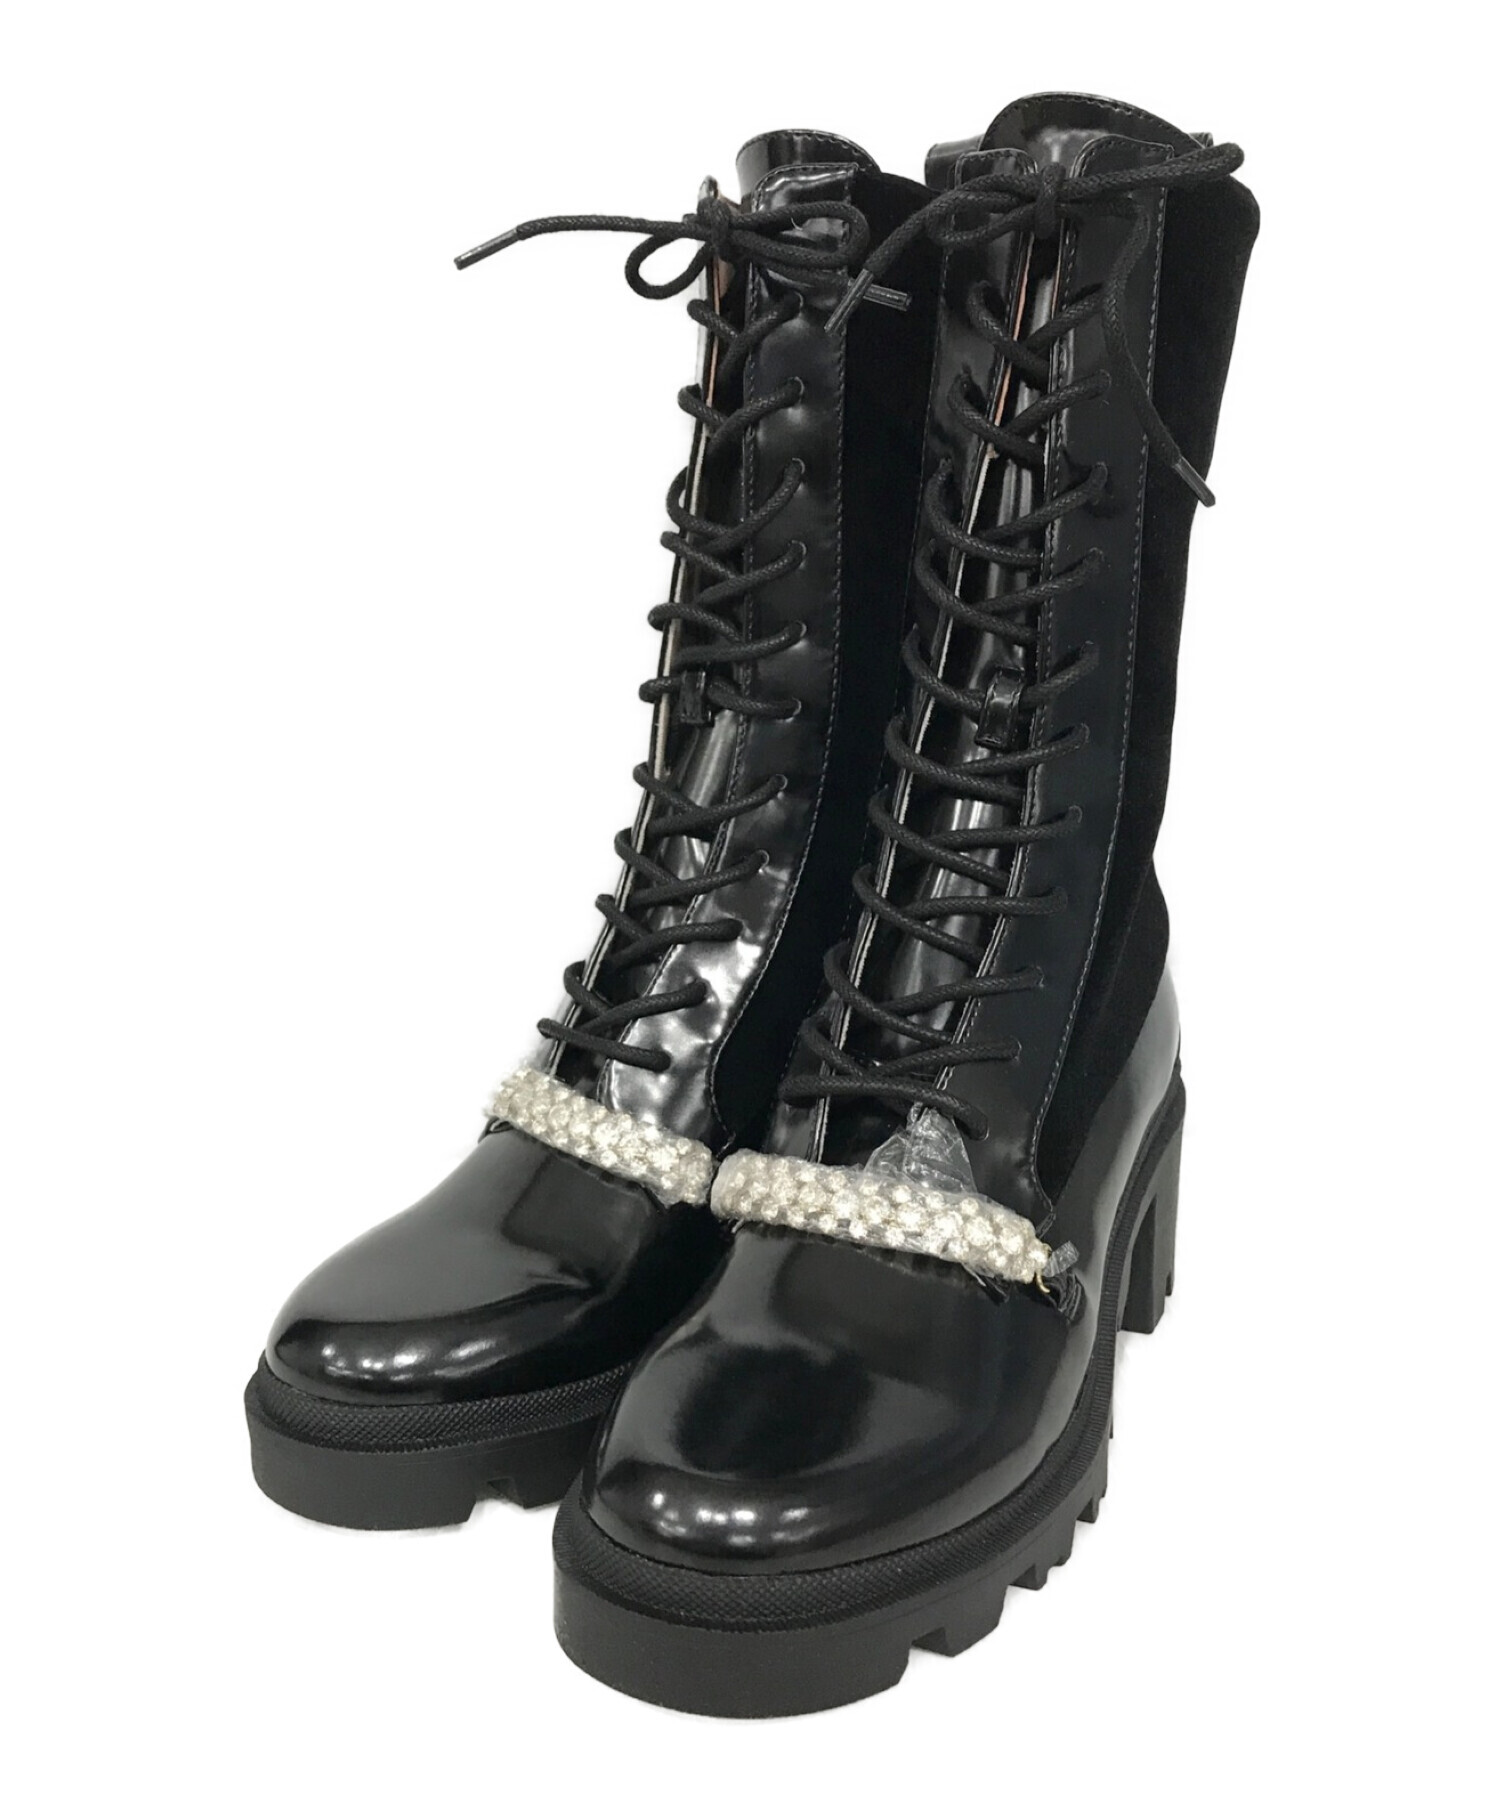 Her lip to Crystal Lace-Up Ankle Boots